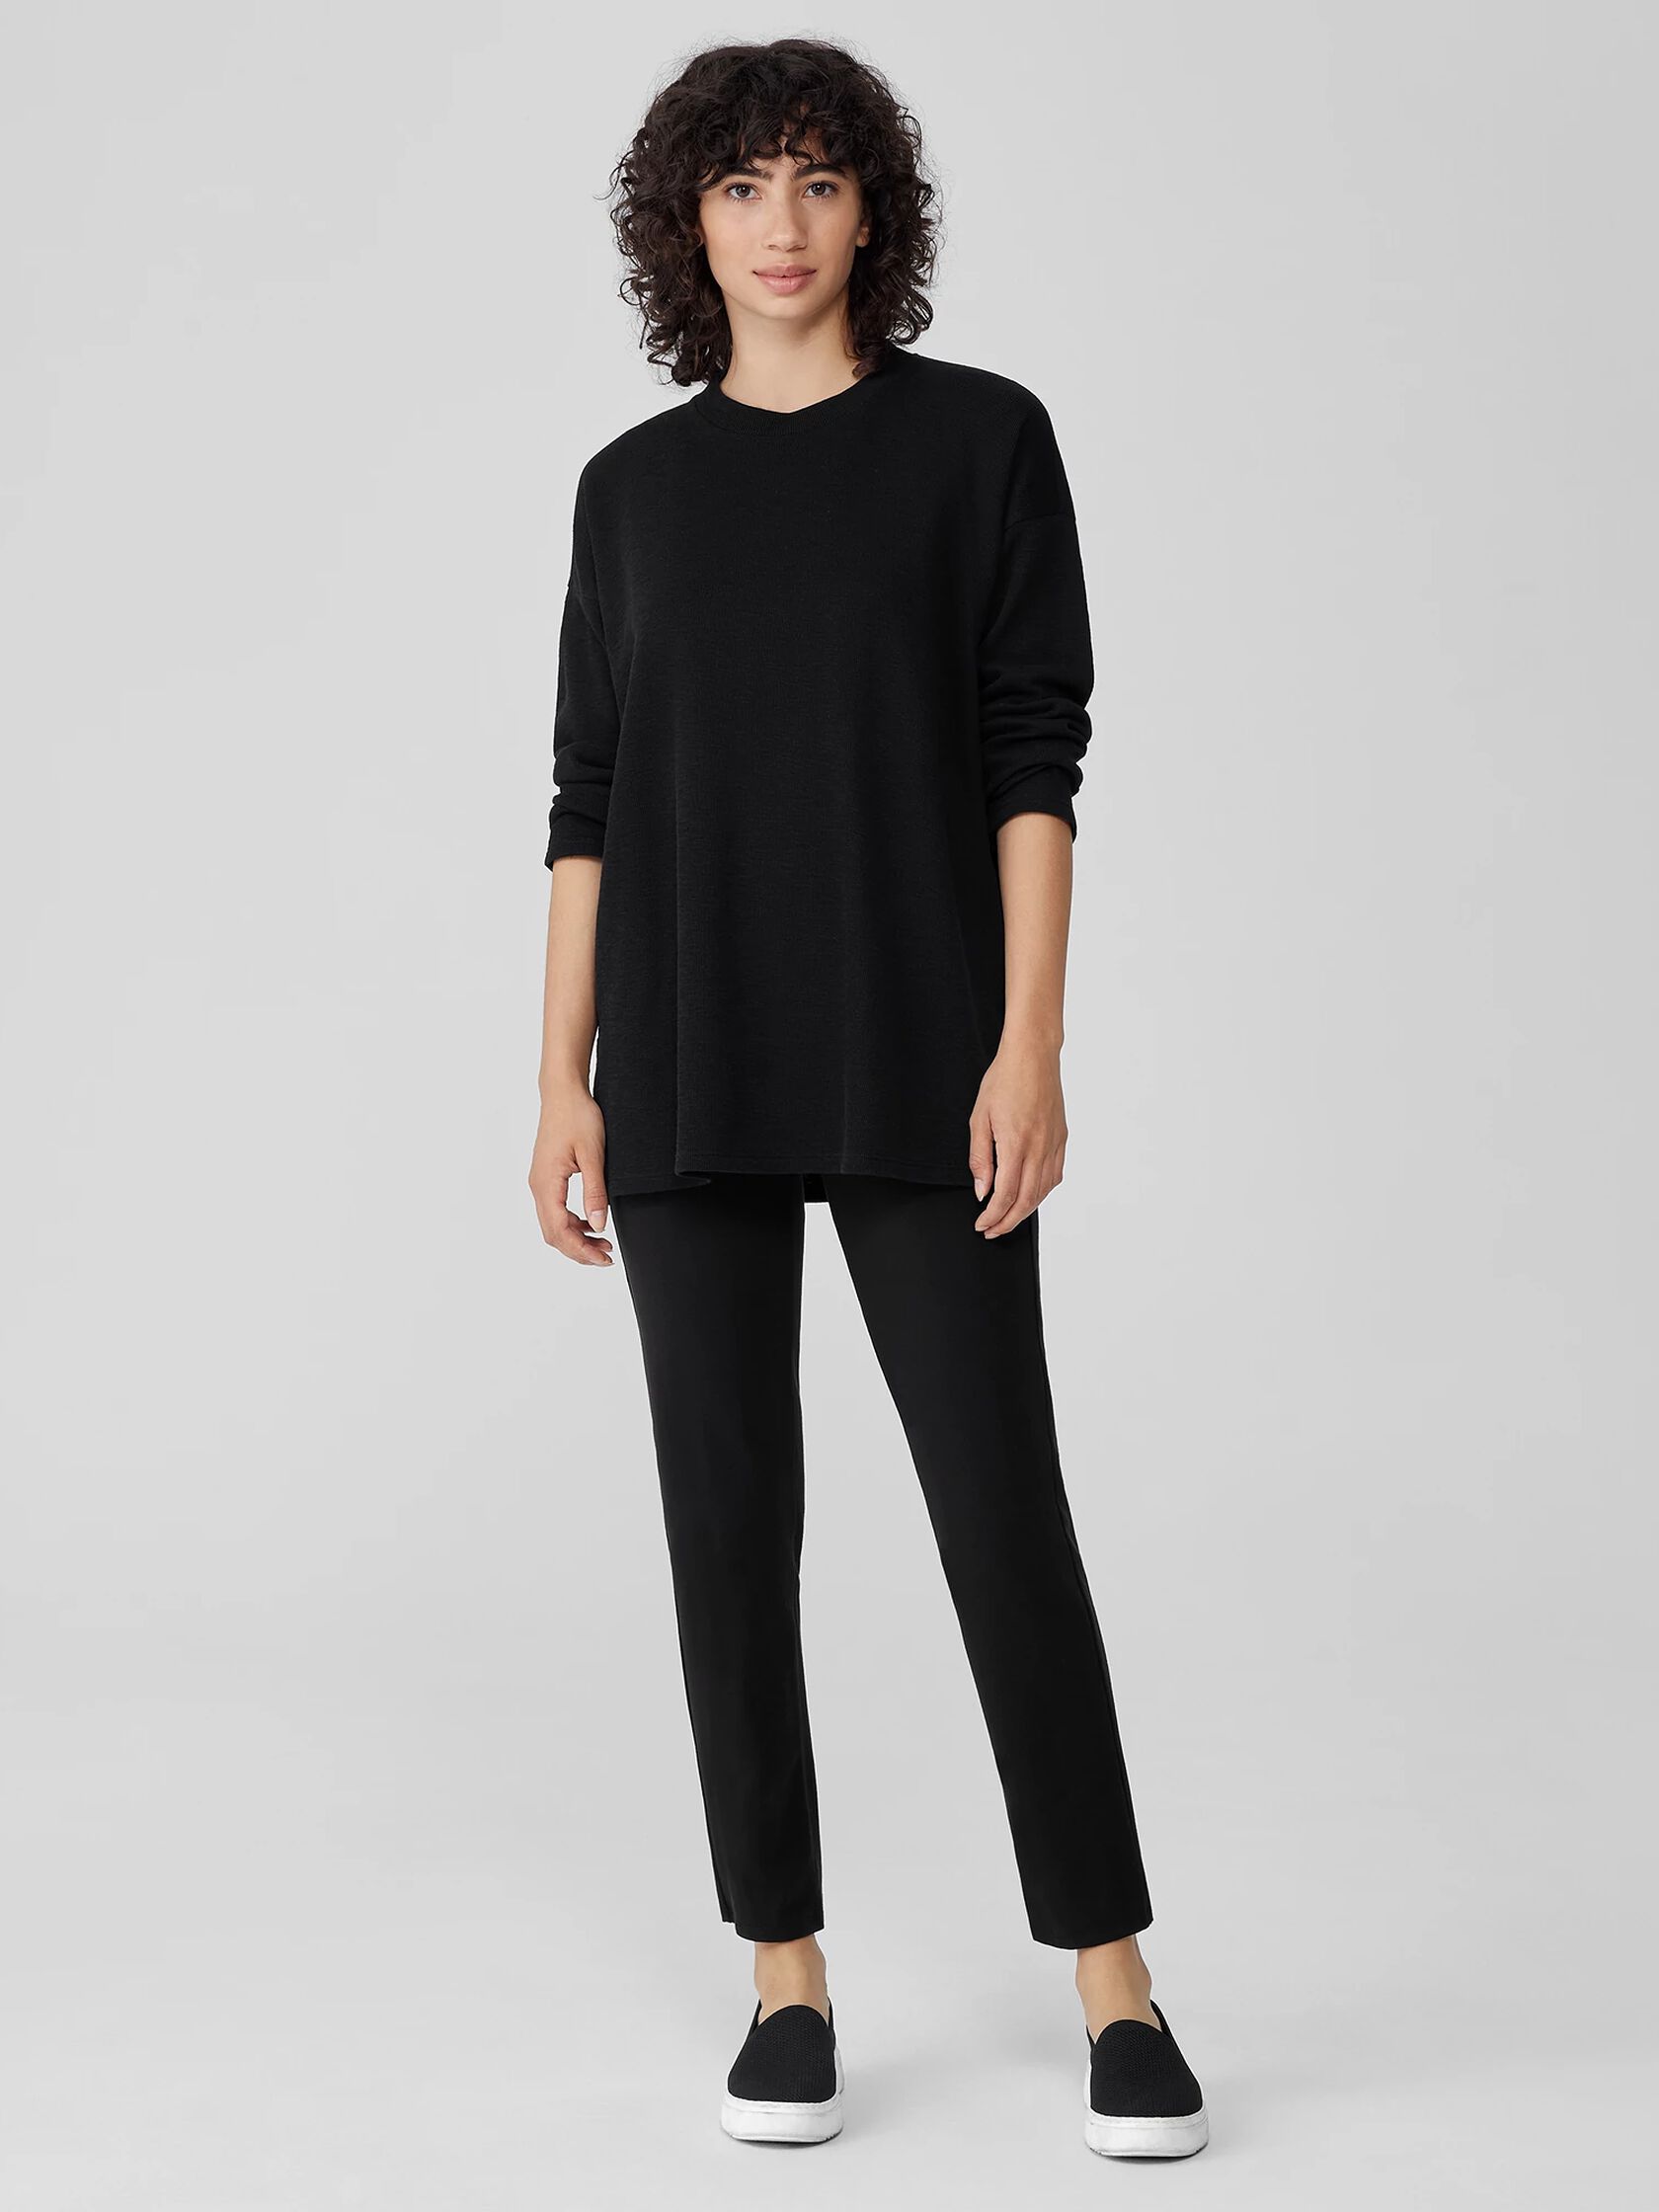 Pima Cotton Stretch Jersey High-Waisted Pant | EILEEN FISHER